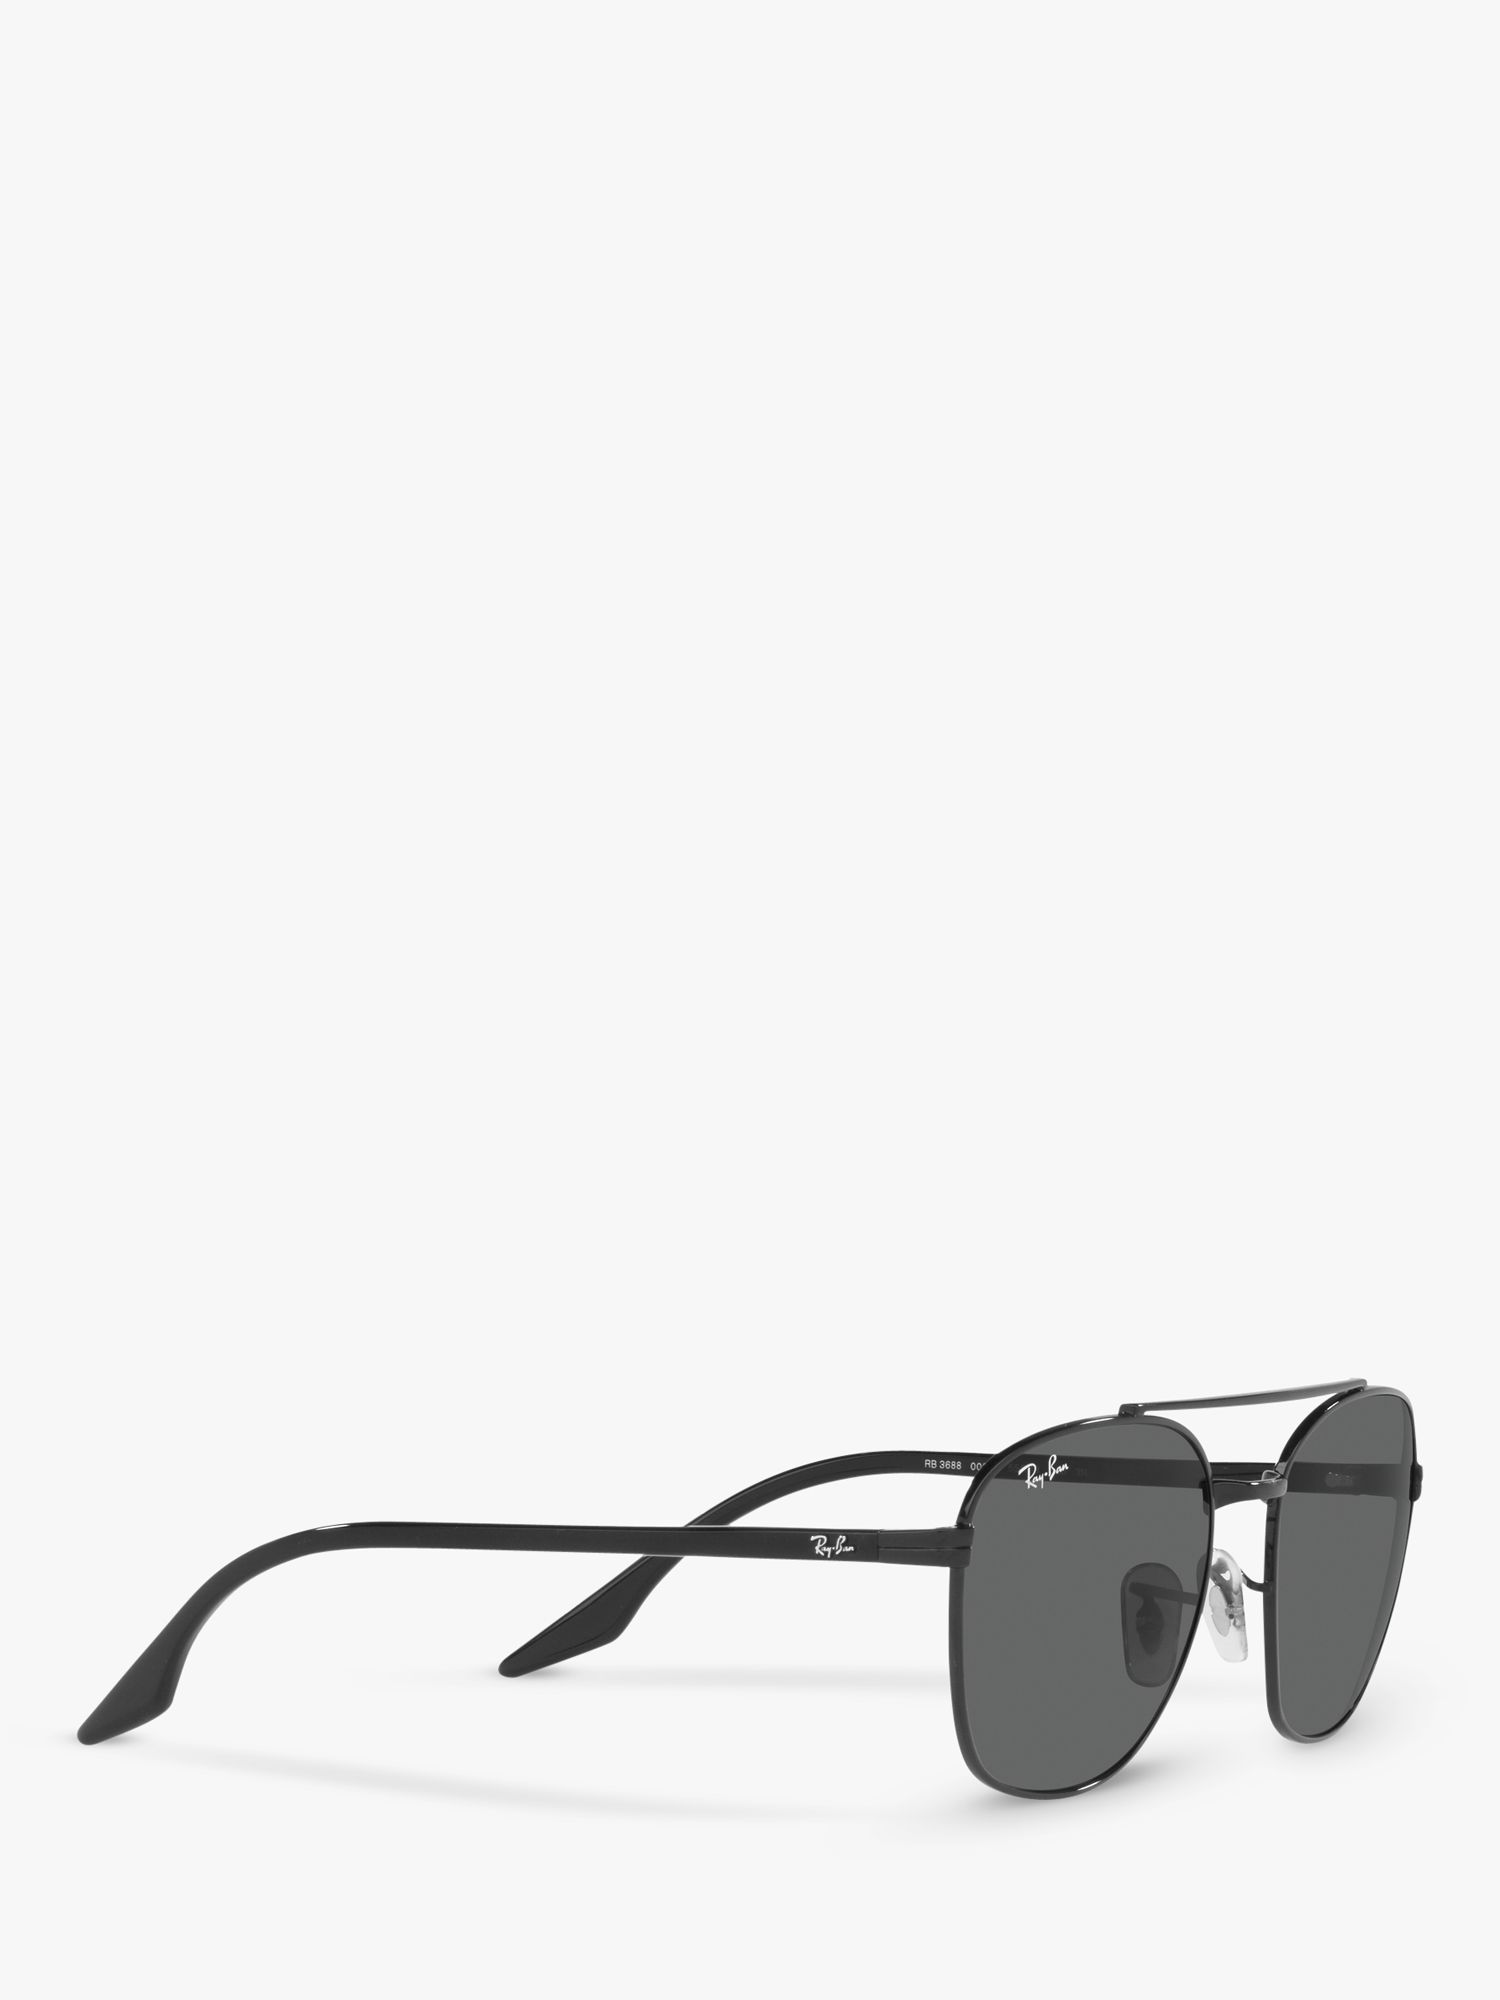 Buy Ray-Ban RB3688 Unisex Square Sunglasses, Black/Grey Online at johnlewis.com